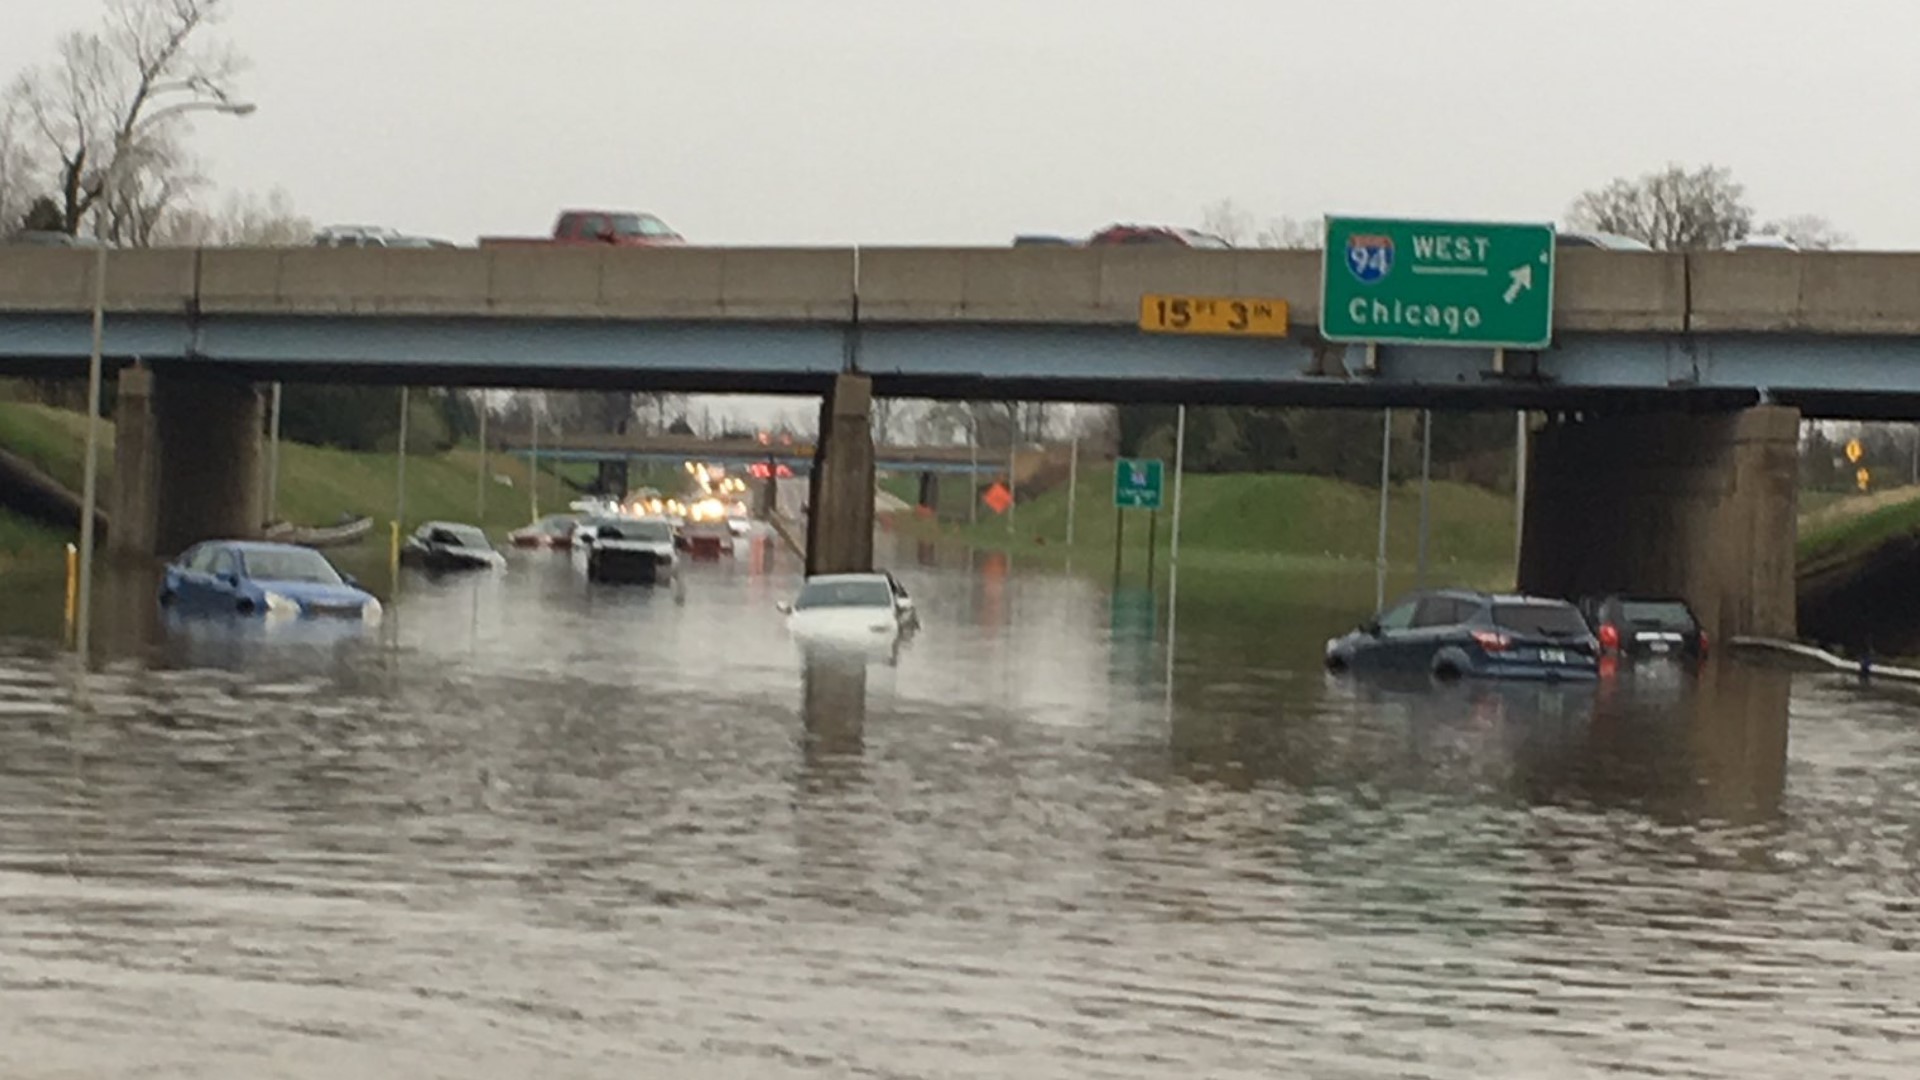 Officials say heavy overnight rains led to street flooding in the Detroit area and other parts of southeastern Michigan.